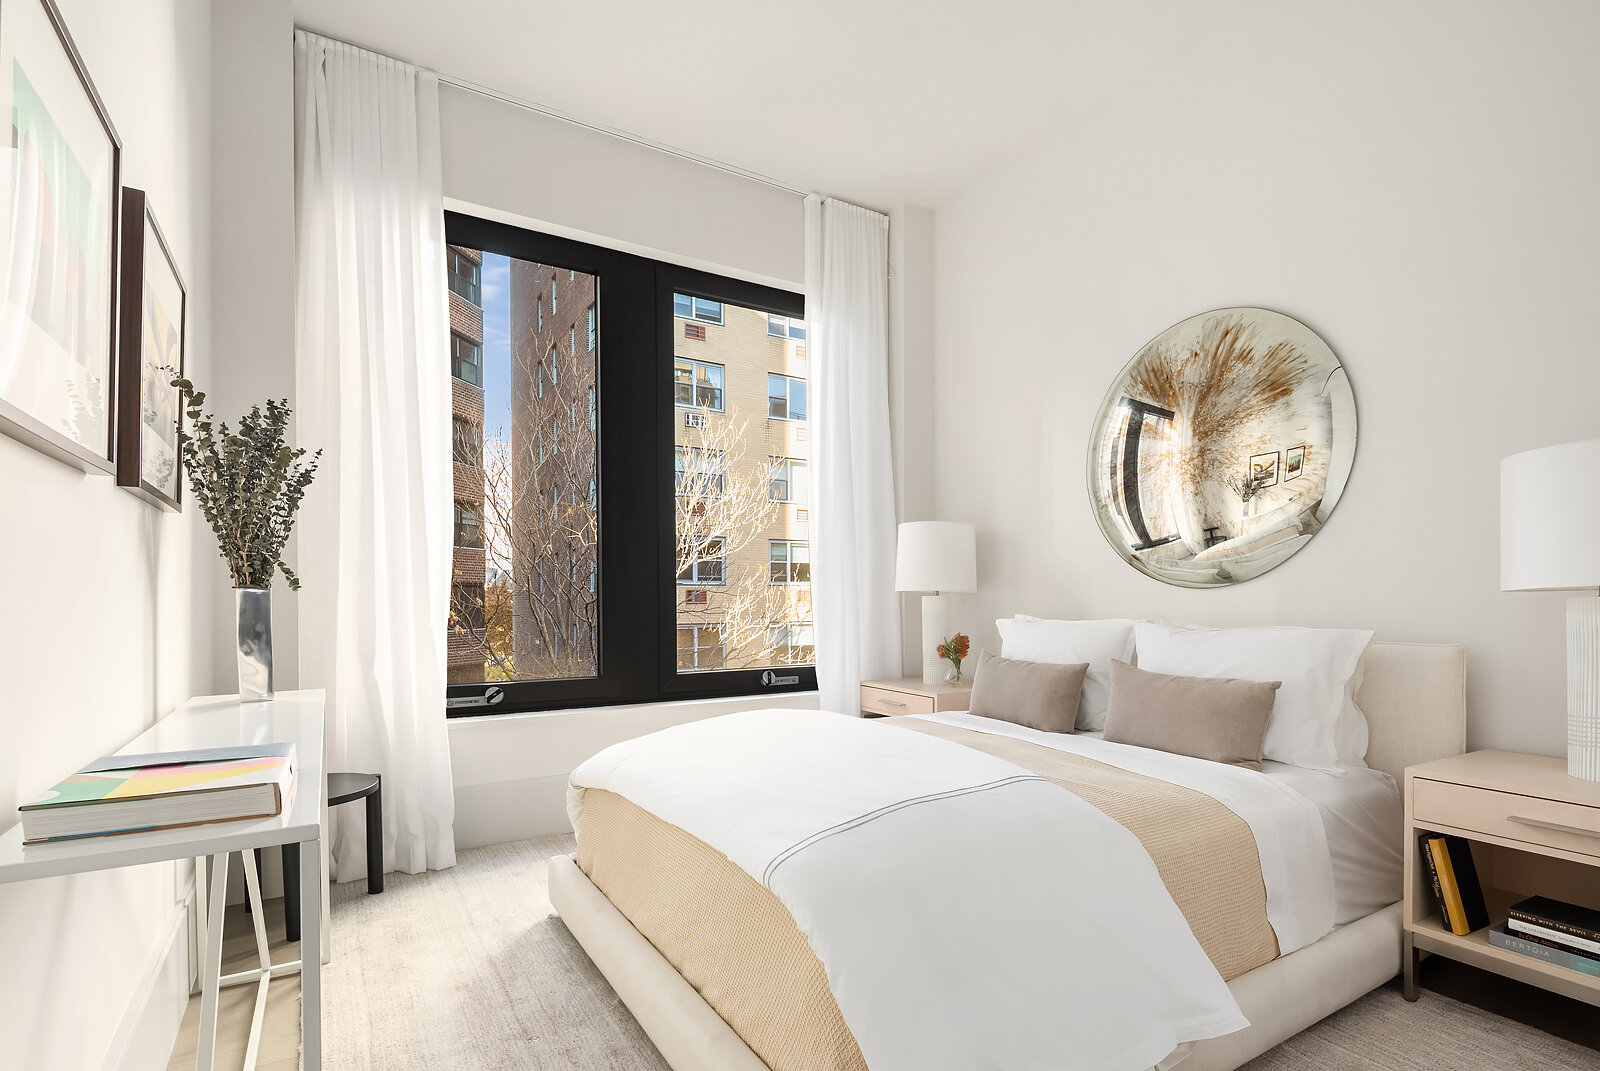  17 Jane Street is a rare ground-up new building in the heart of the historic West Village. Designed by the famed English architect Sir David Chipperfield, the boutique condominium is a timeless Roman-style brick and sculptural concrete building that